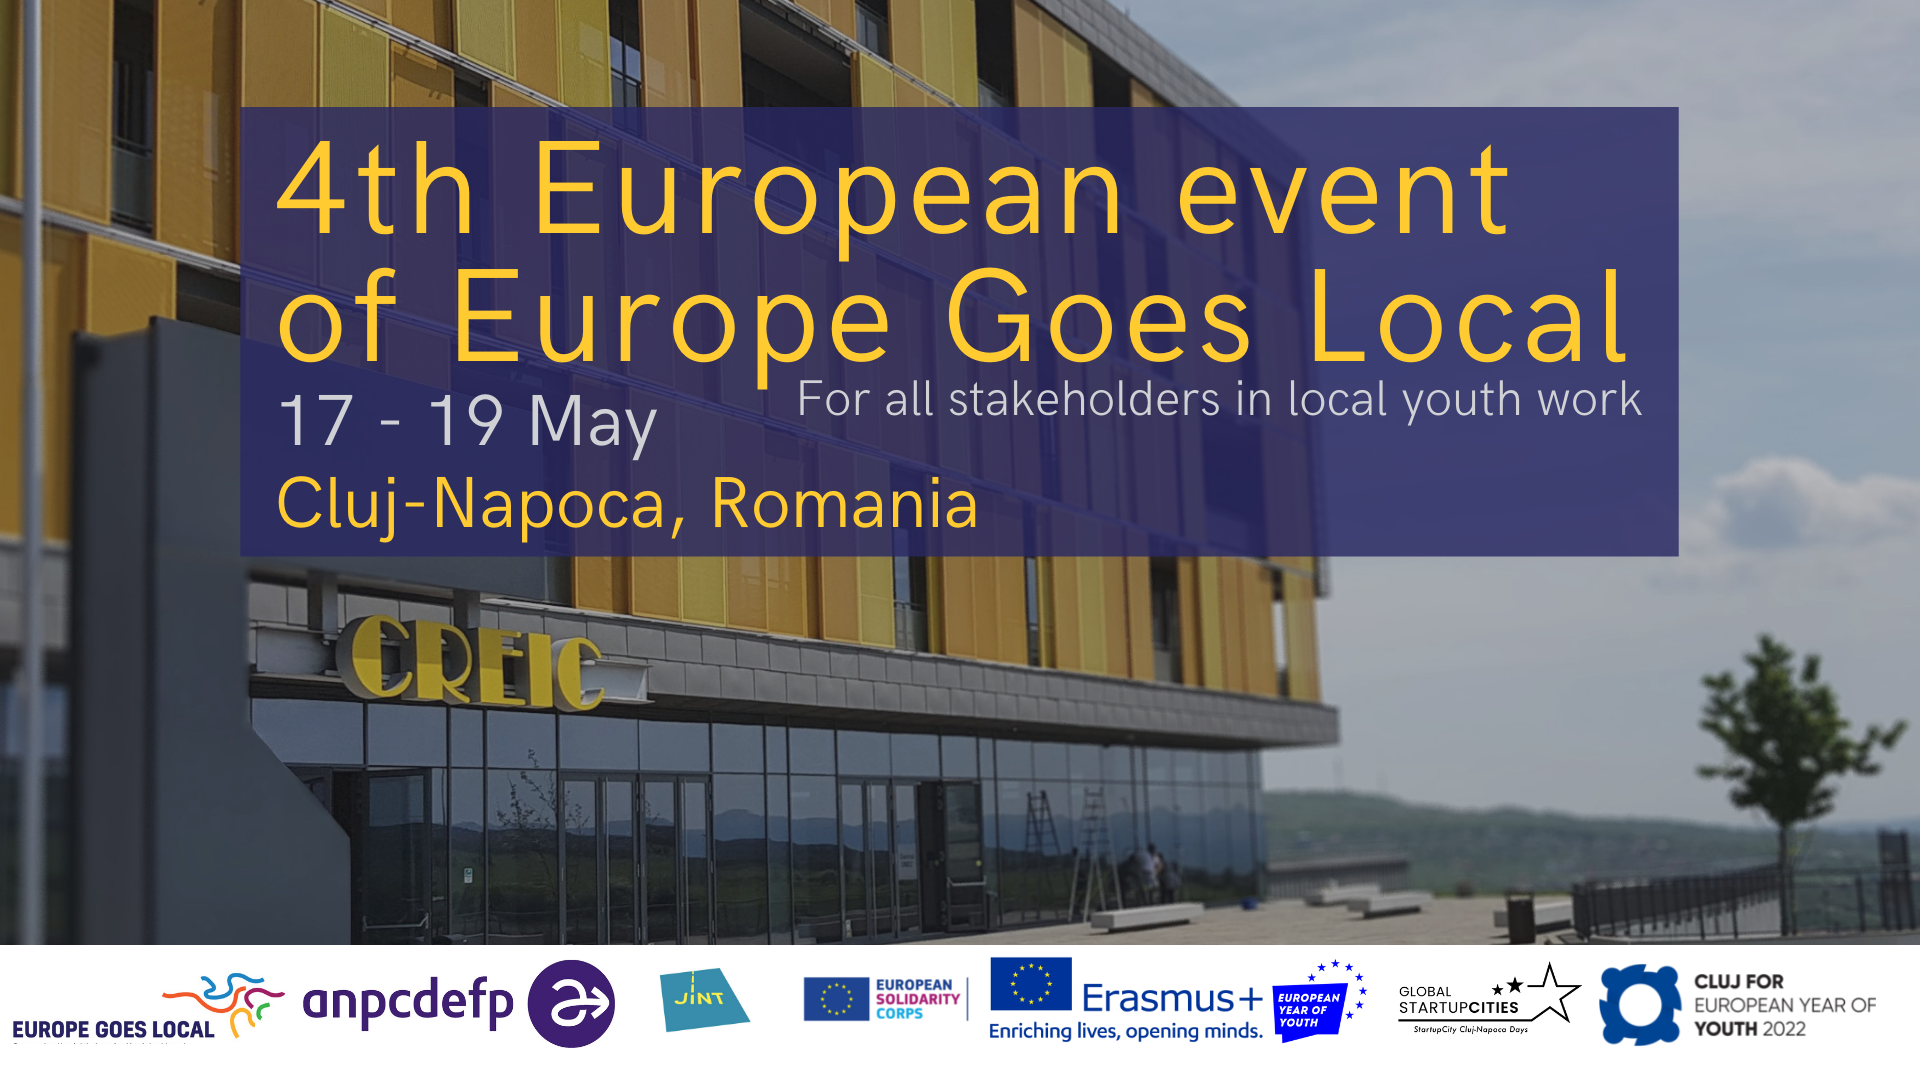 4th European event of Europe Goes Local